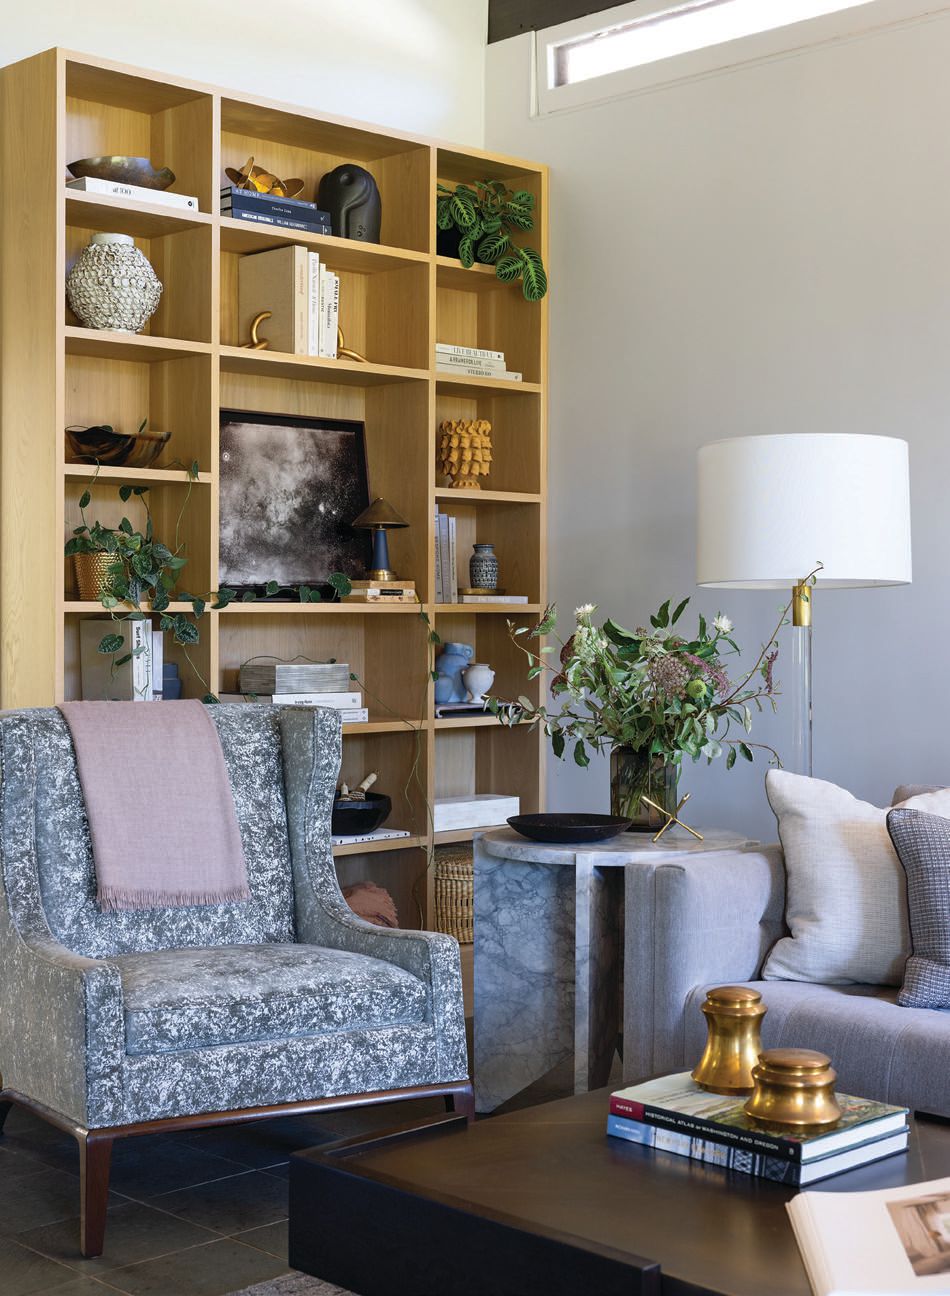 Built-in shelving adds a decorative element to the living room and lots of functionality PHOTOGRAPHED BY BESS FRIDAY STYLED BY BETH PROTASS